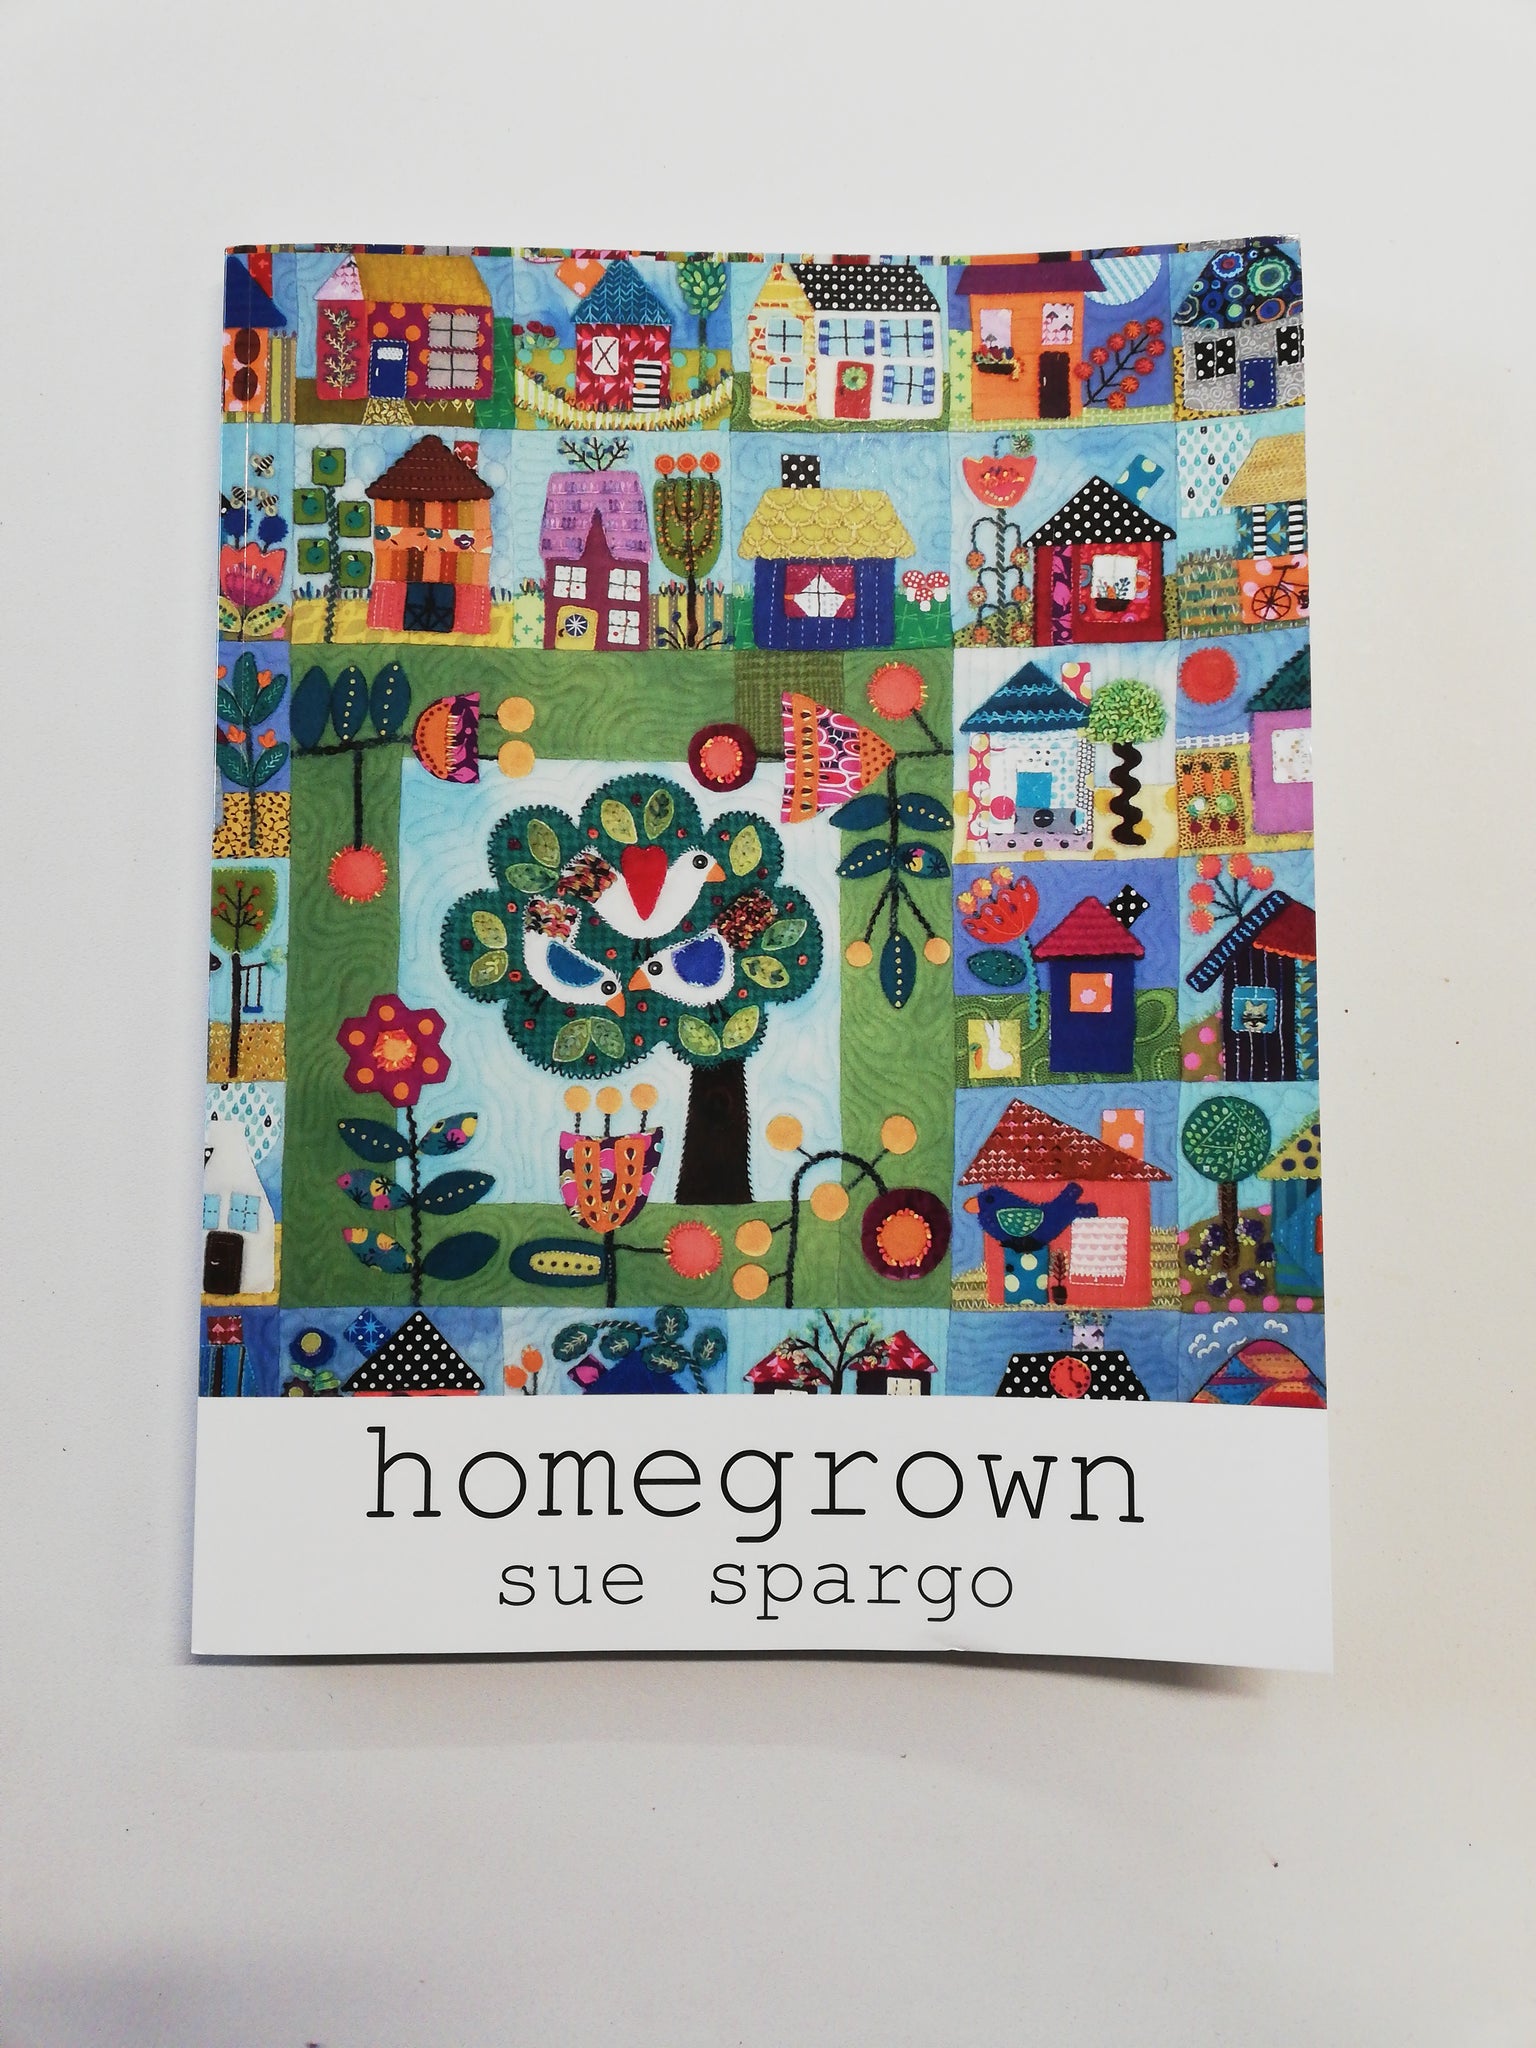 "Homegrown" by Sue Spargo